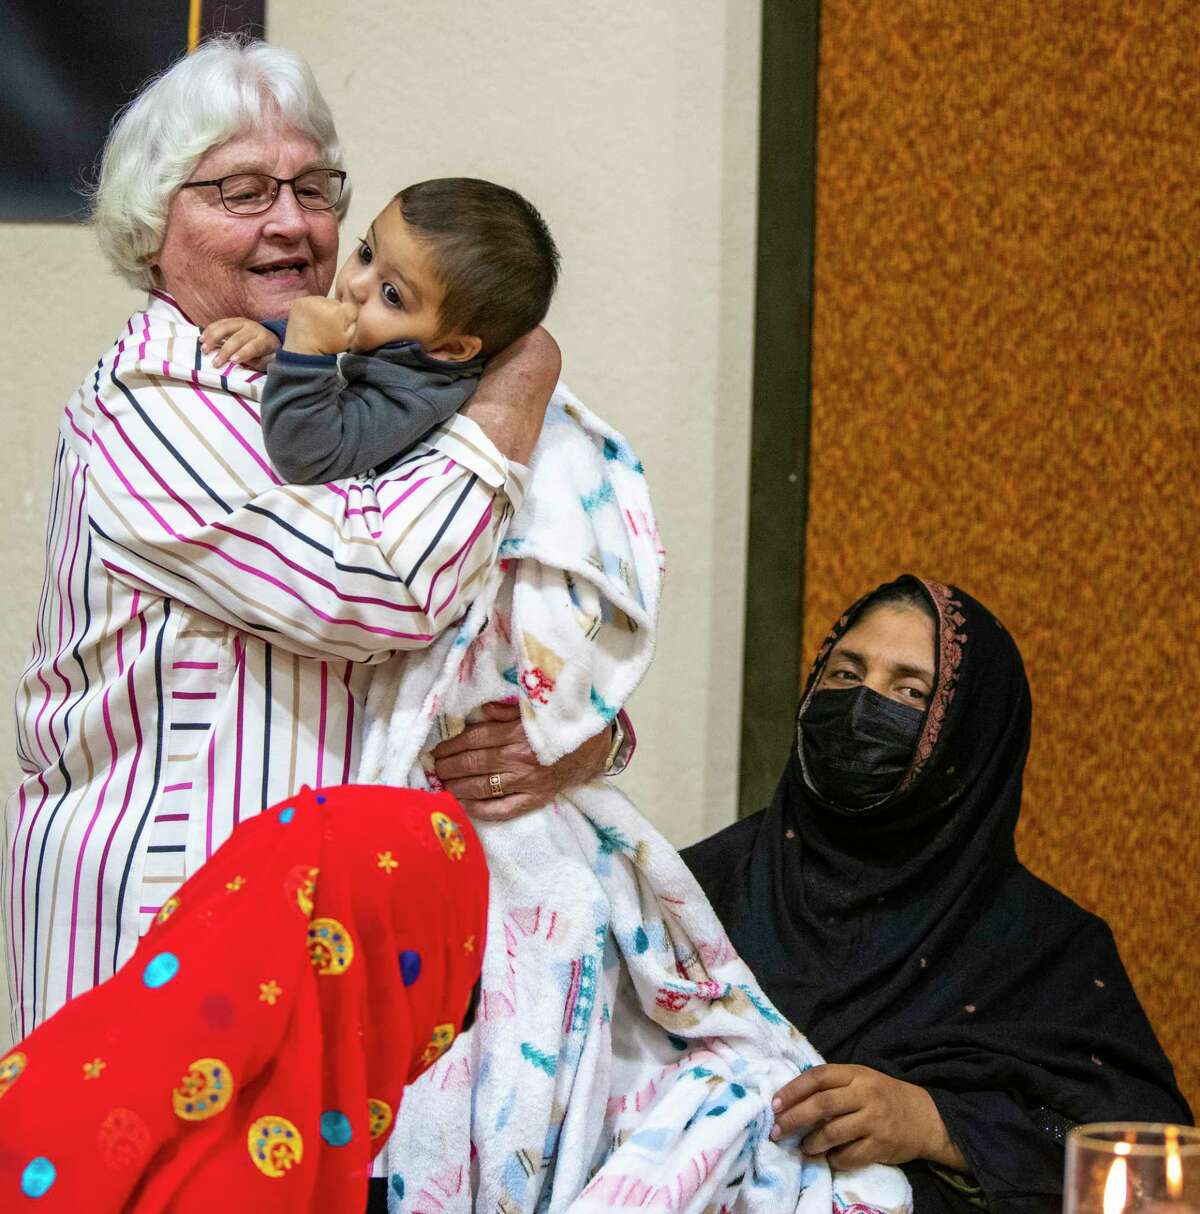 Anne Ziegler interacts with members of the Afghan community attending an interfaith Thanksgiving dinner on Sunday. The event was attended by Ethiopian, Congolese and several Afghan refugee families at Cross Roads Church in Windcrest.